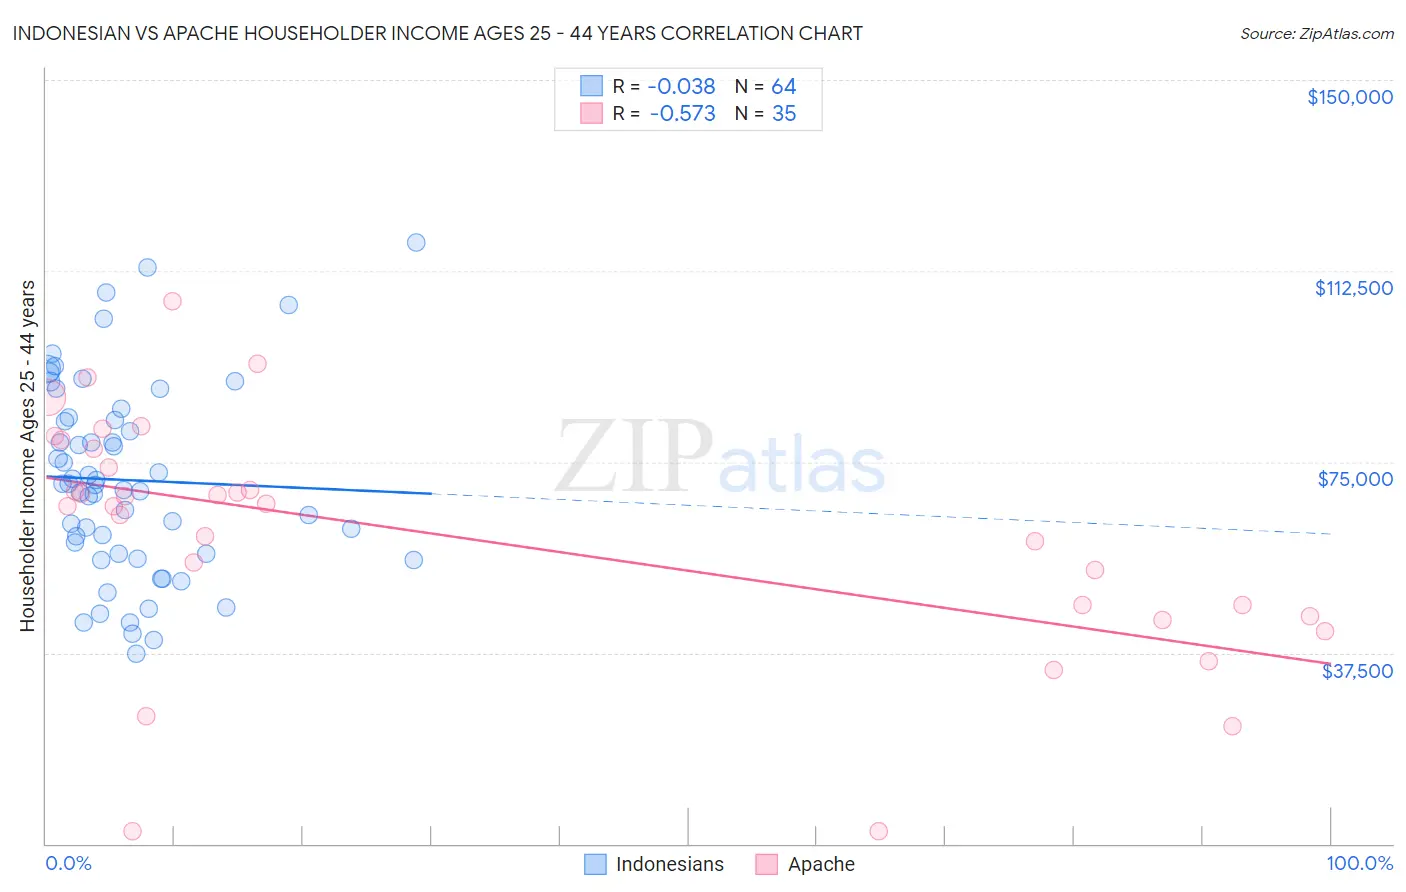 Indonesian vs Apache Householder Income Ages 25 - 44 years